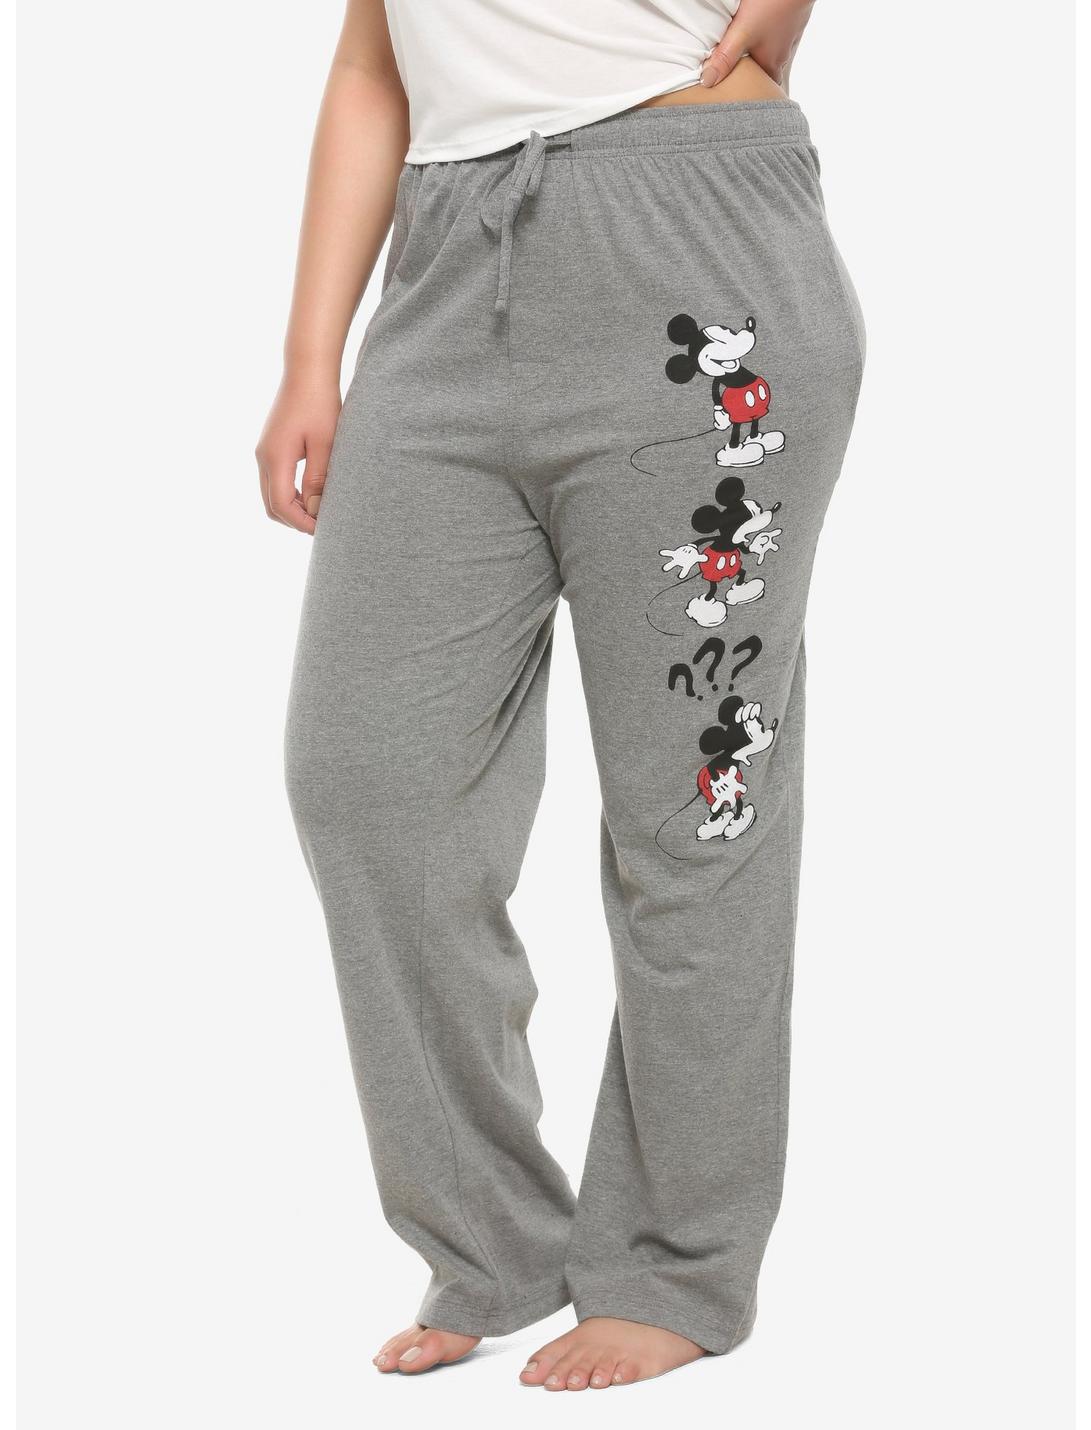 Disney Mickey Mouse Classic Reactions Girls Pajama Pants Plus Size, HEATHER GREY, hi-res